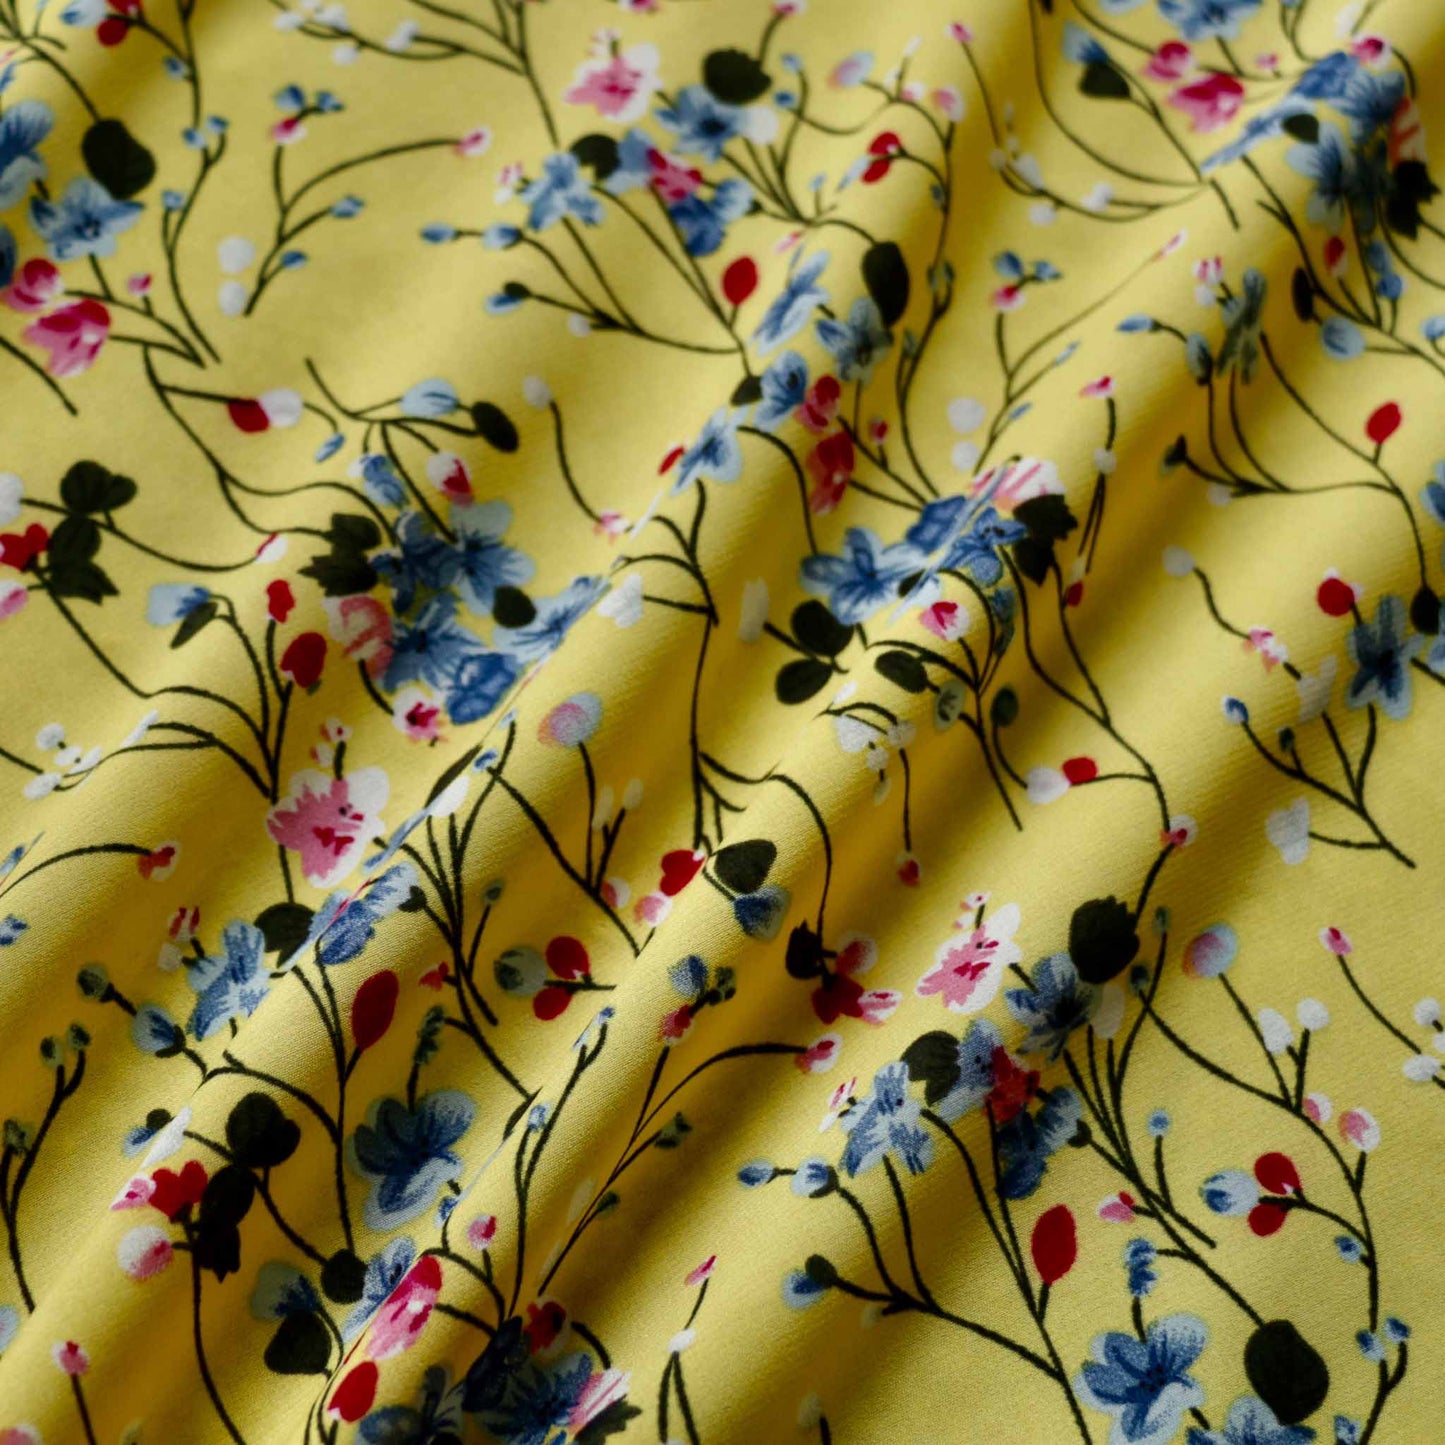 stretchy yellow chiffon polyester dressmaking fabric with black and blue floral print